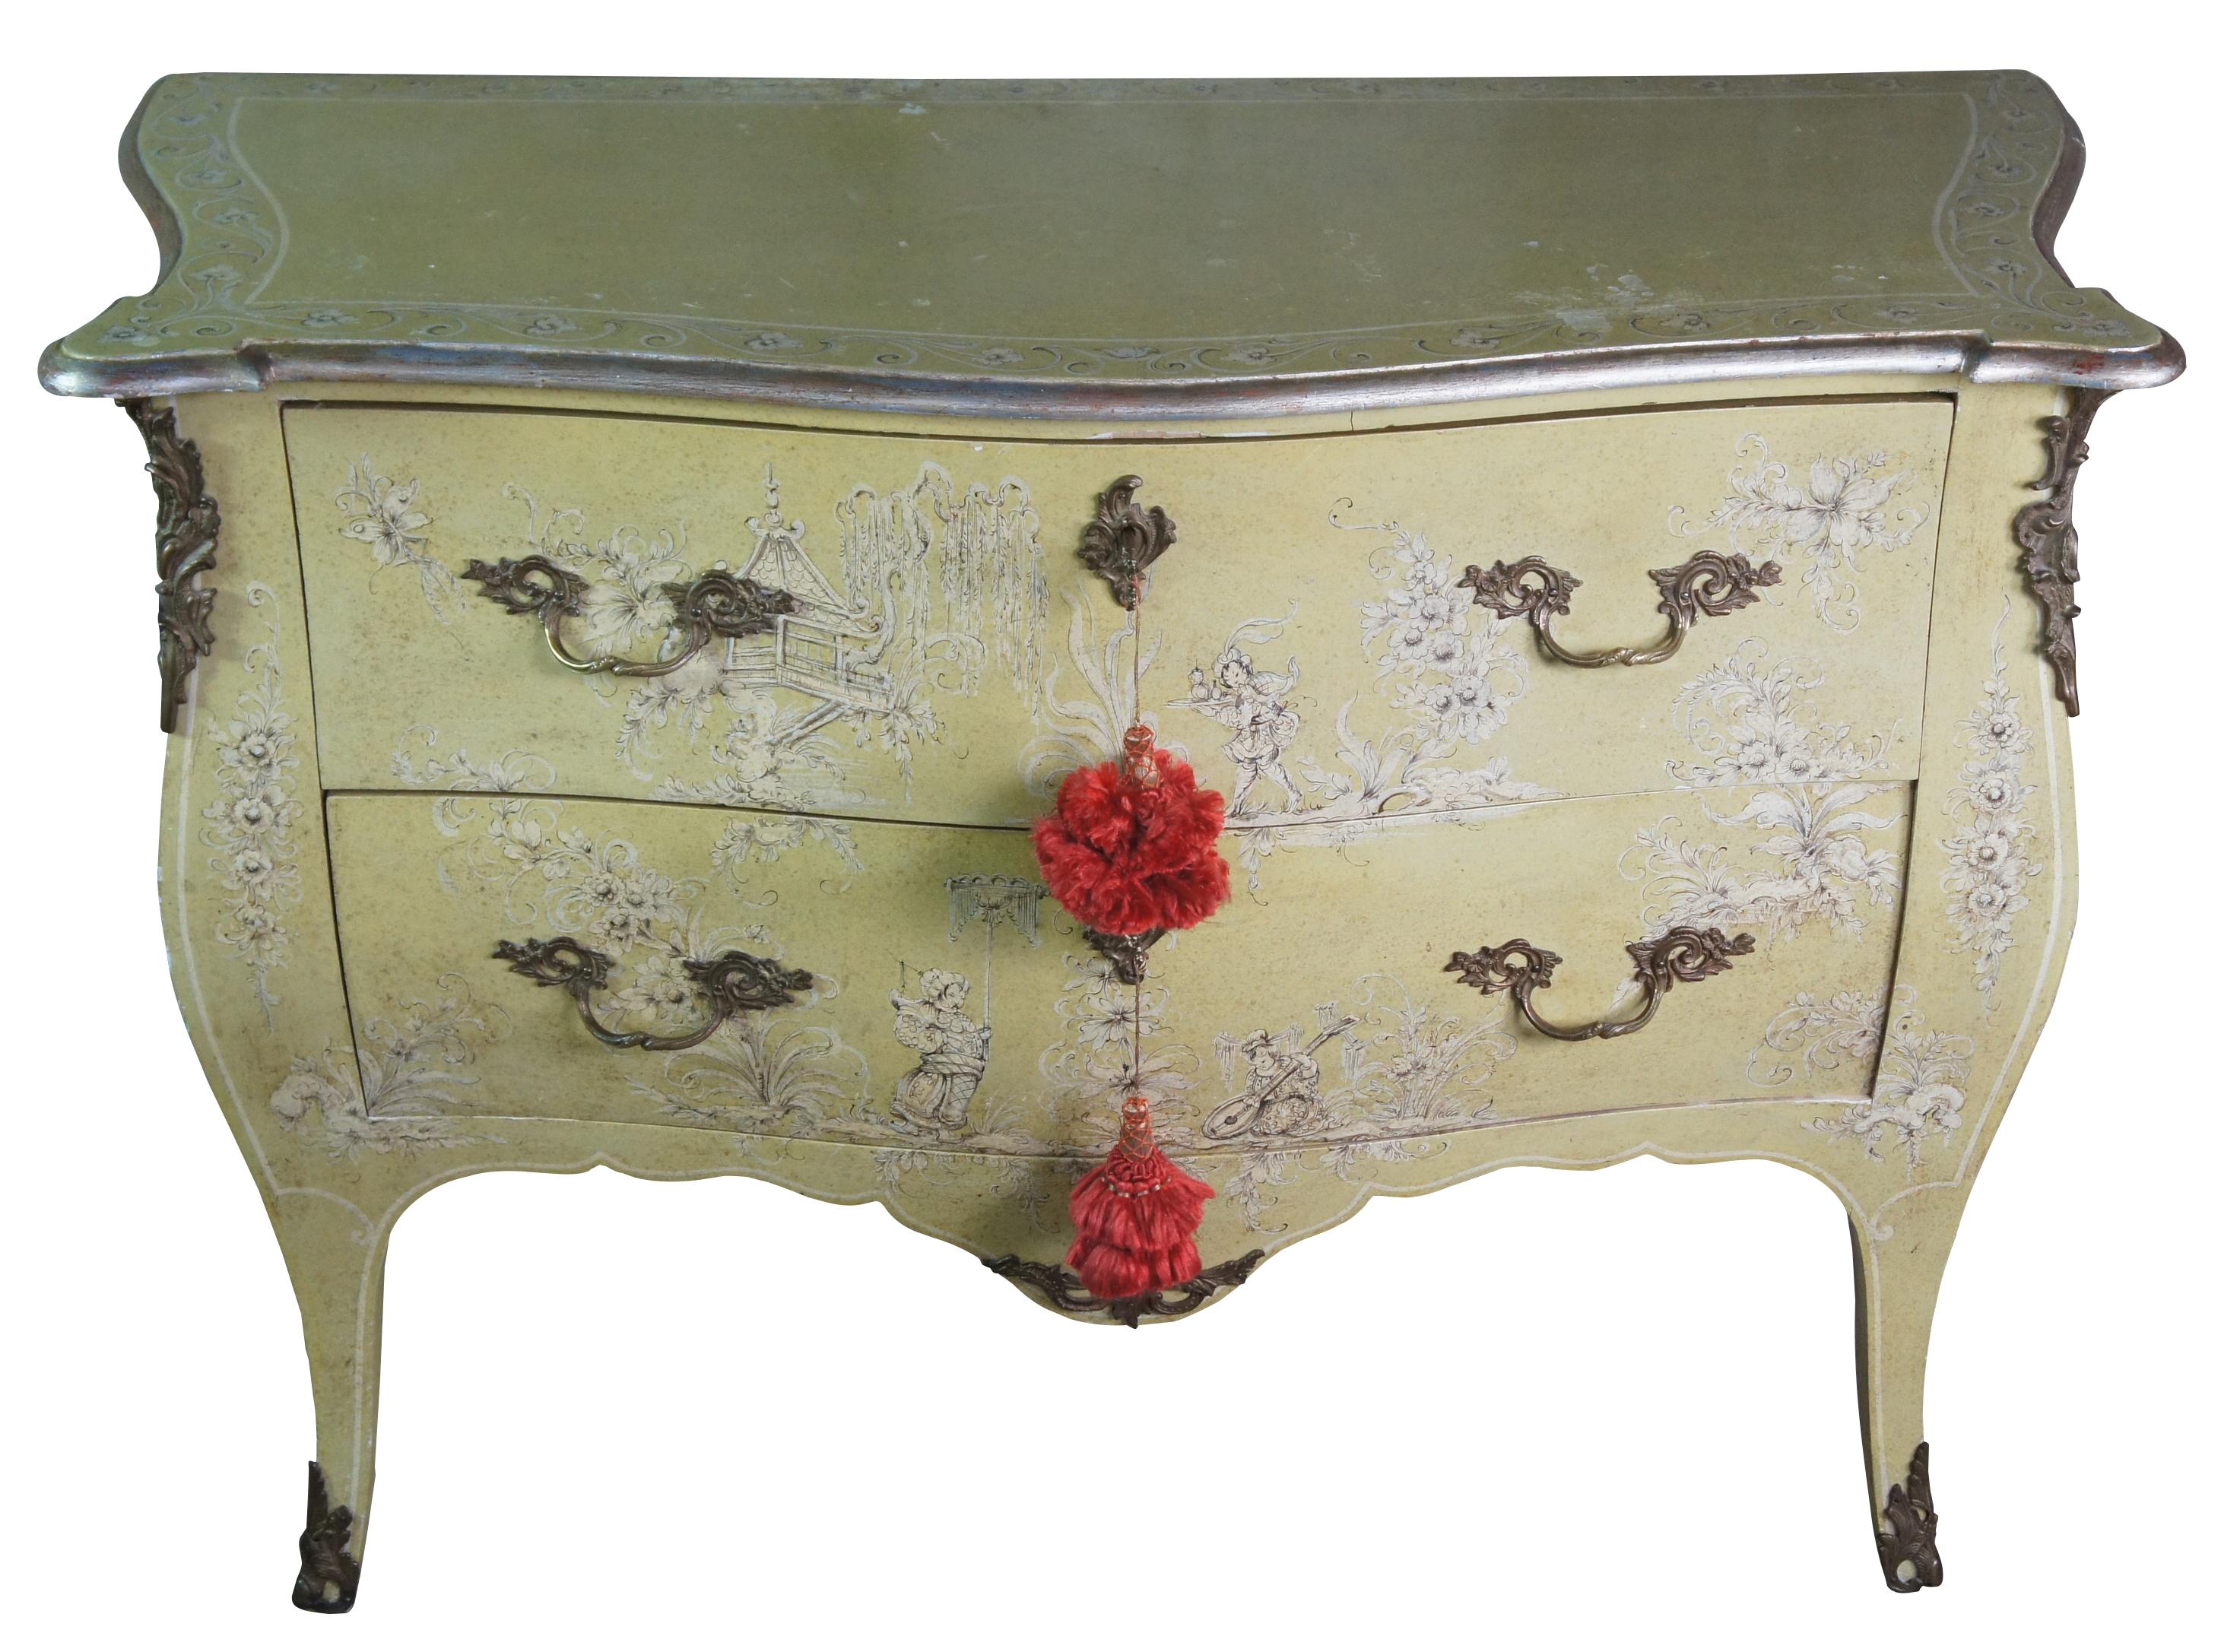 Antique Chinoiserie bombe commode or chest featuring serpentine form with baroque designs, and painted floral landscape scenes of trees and pagodas featuring geishas, warriors, musicians and service staff. Includes bronze ormalu mounts and 2 keys.
 